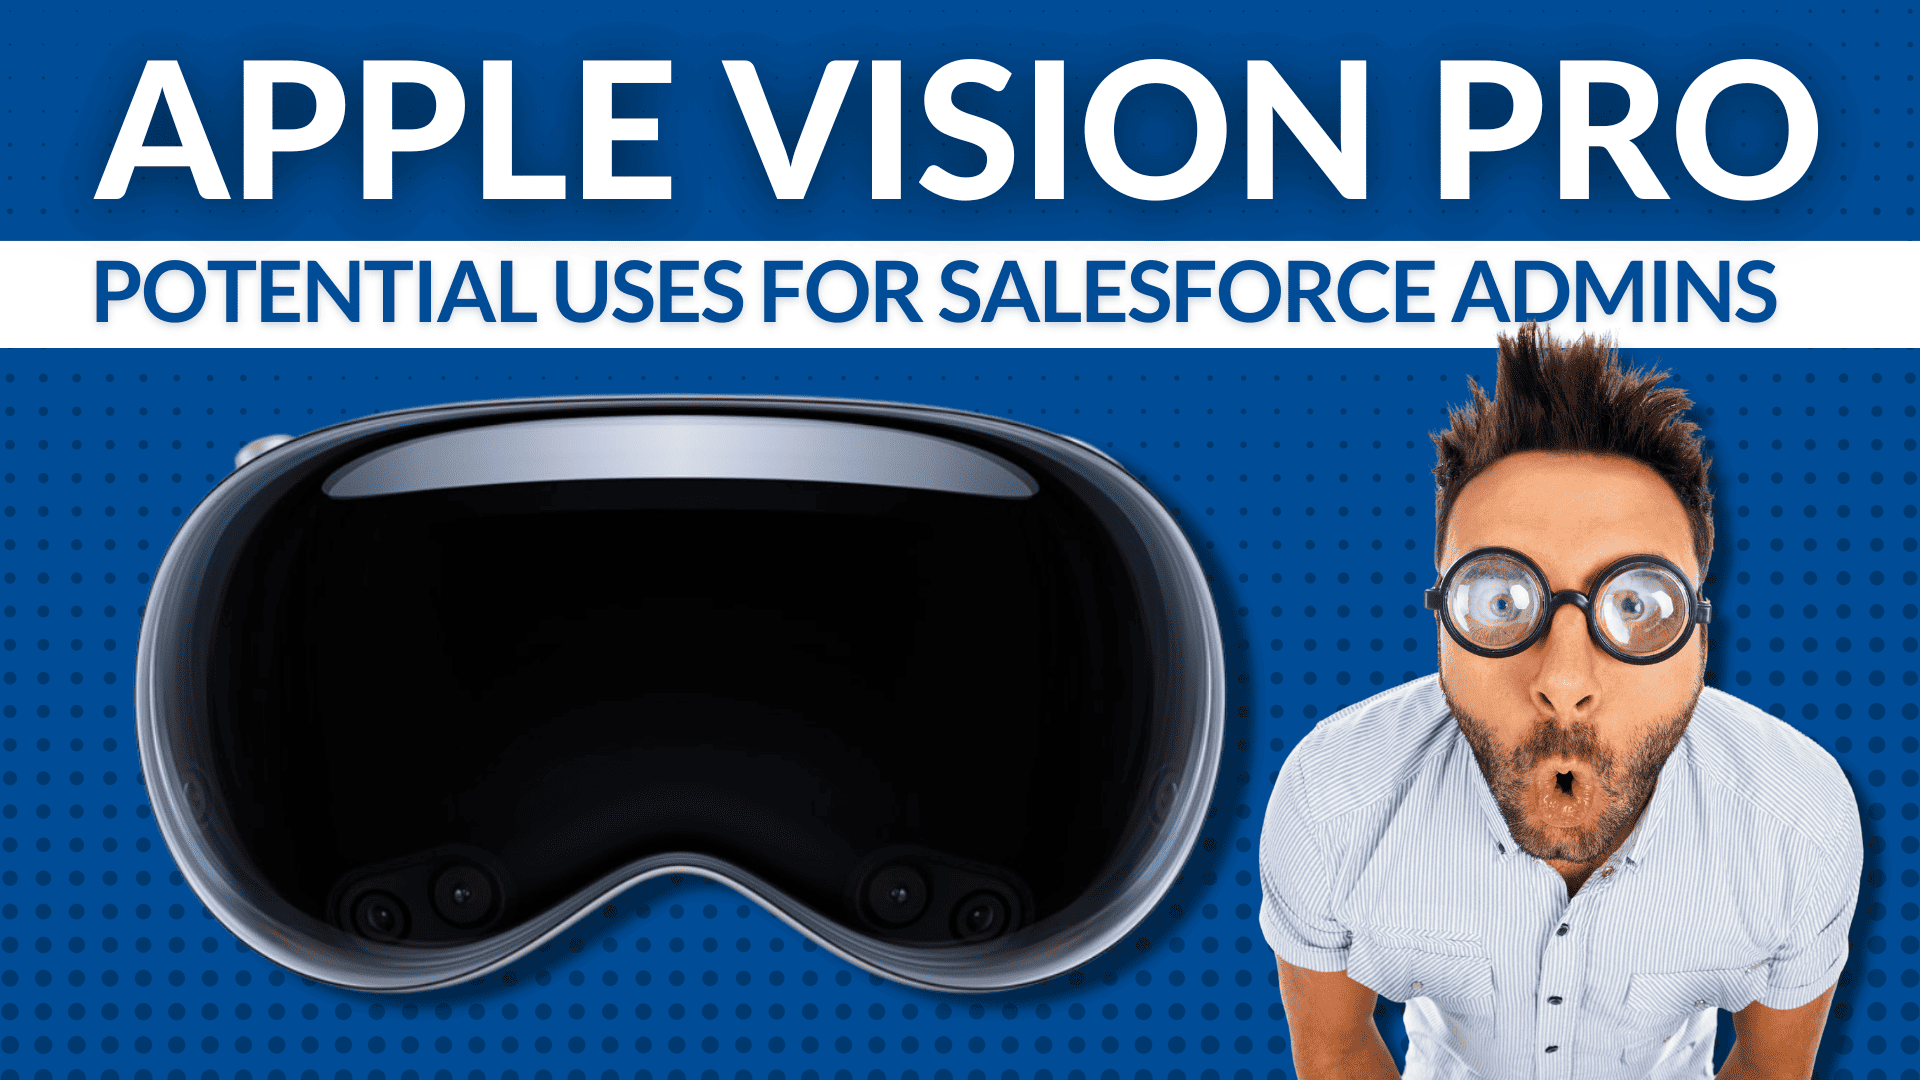 Join us for a comedic journey into the future! Discover how Apple Vision Pro can be used in Salesforce and explore some funny scenarios that may come out of it.